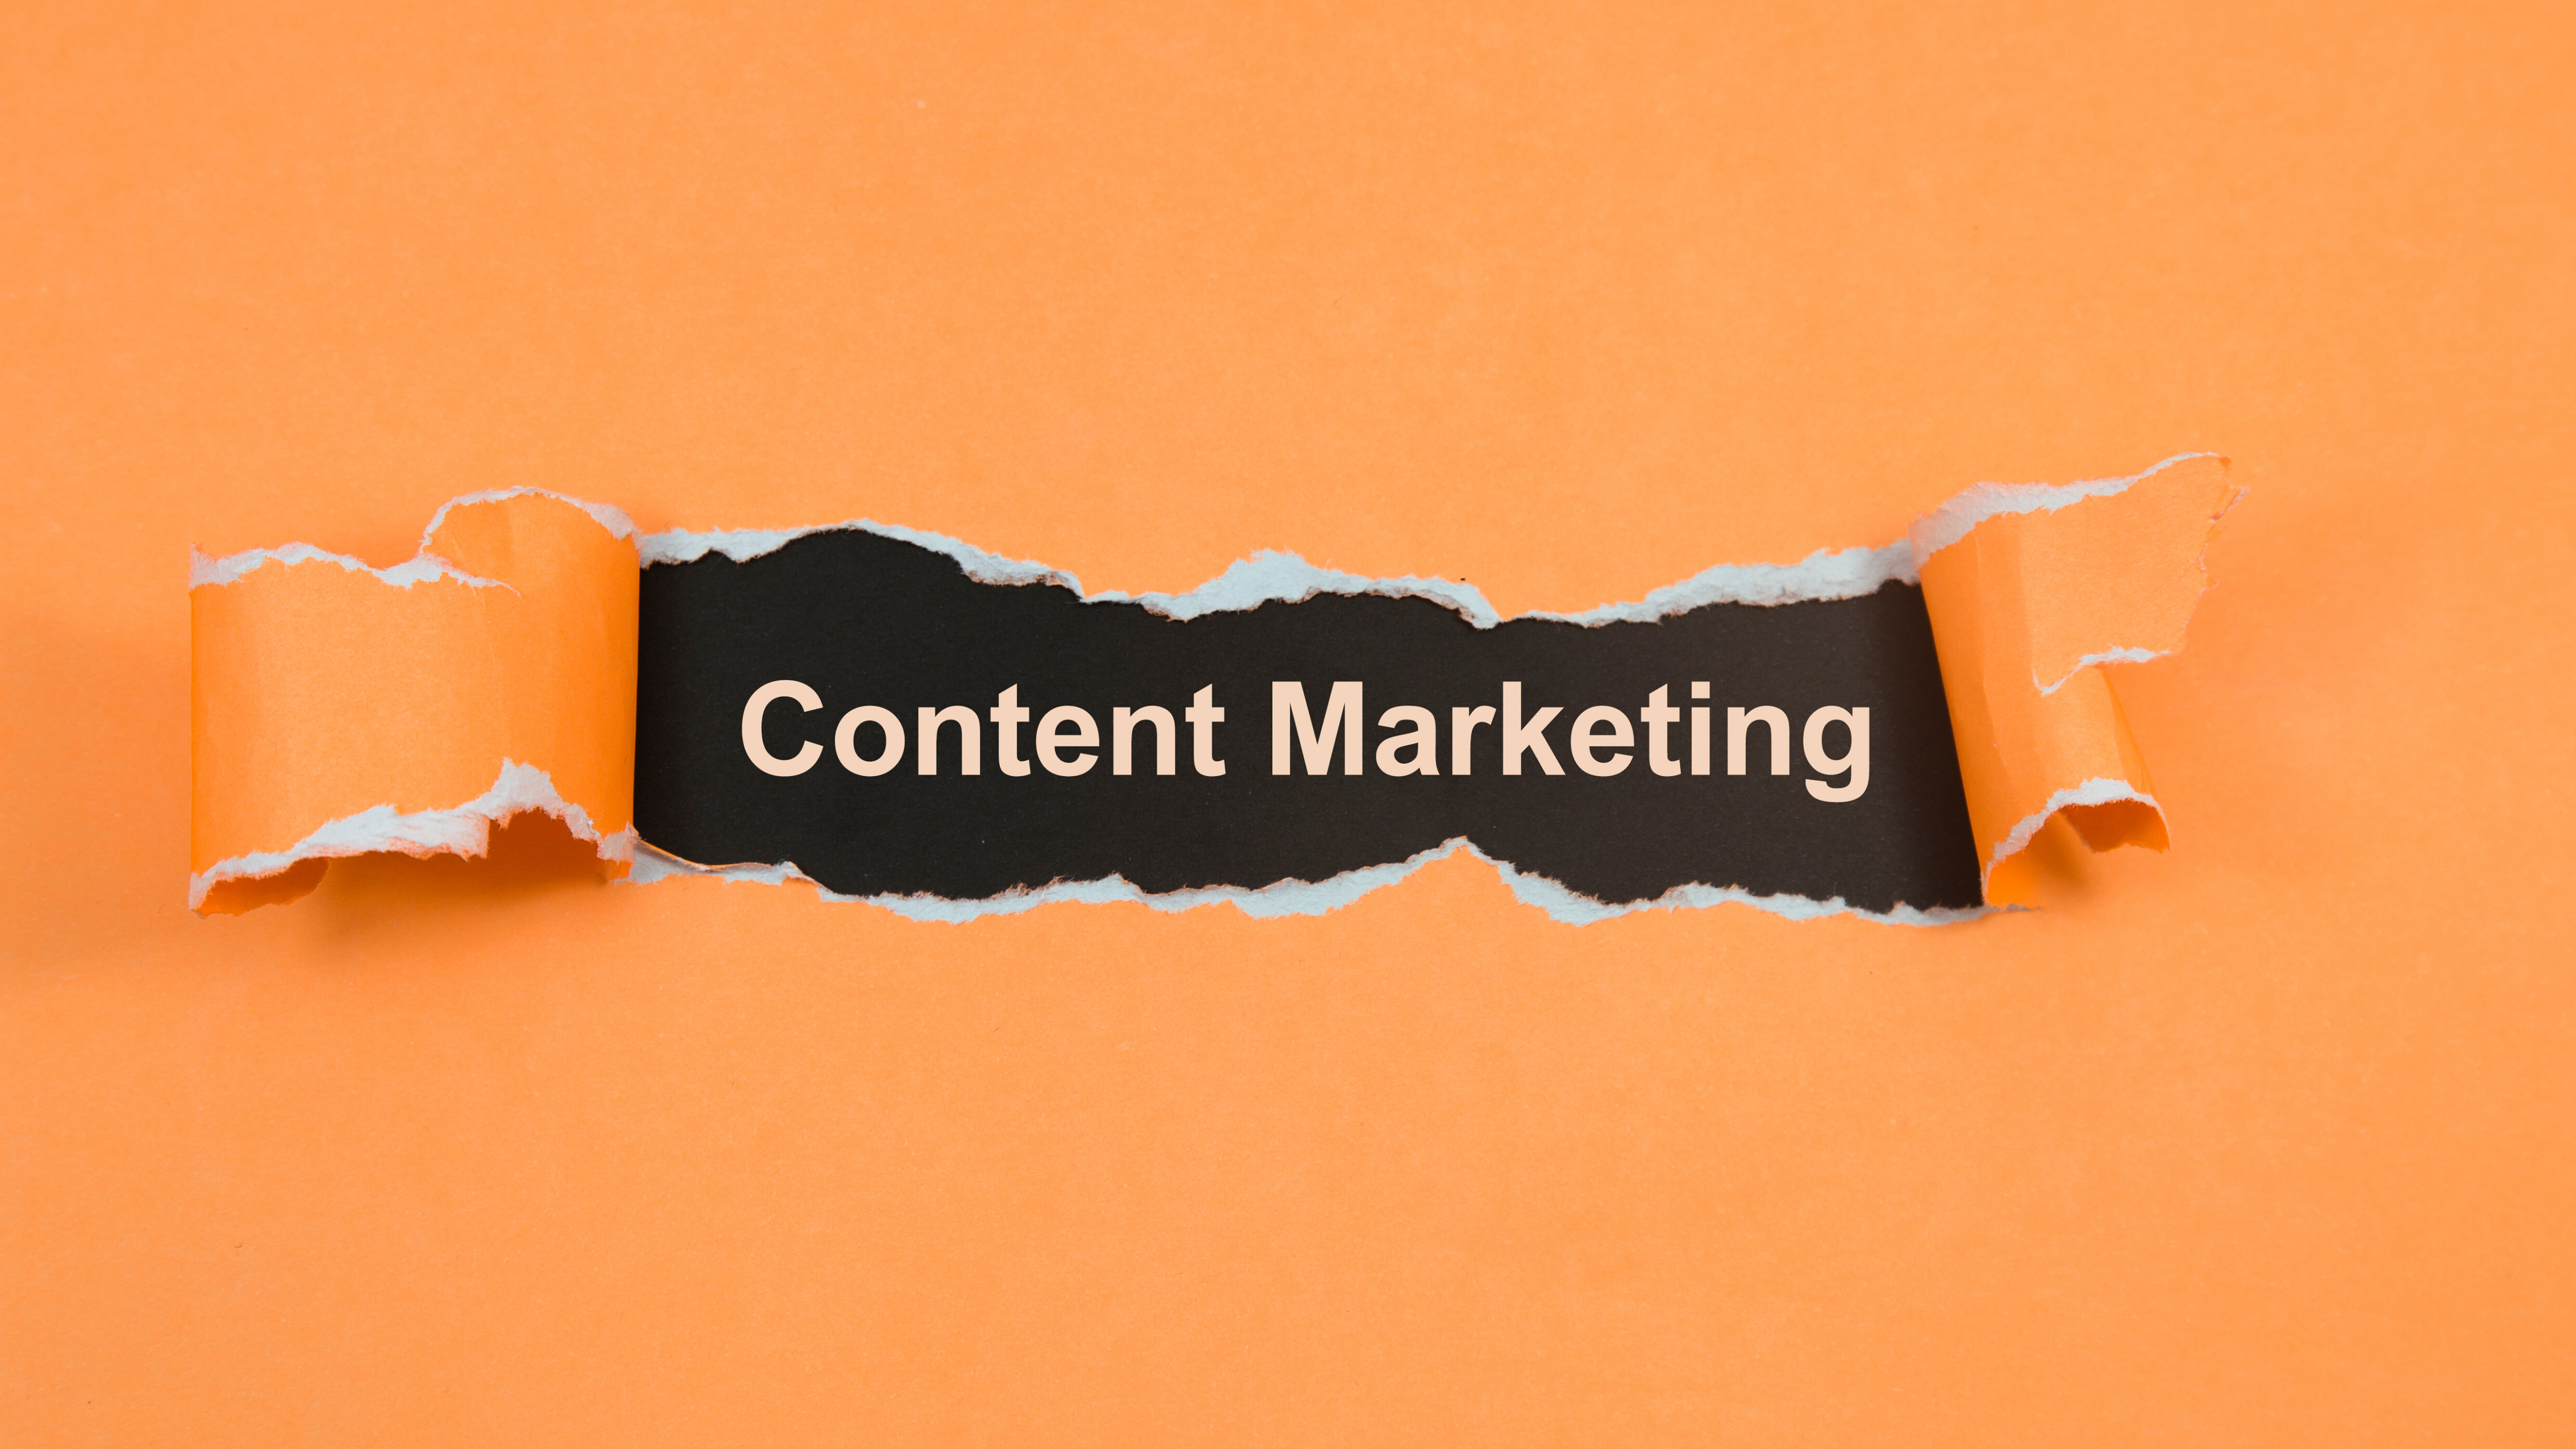 An image that says "Content Marketing"